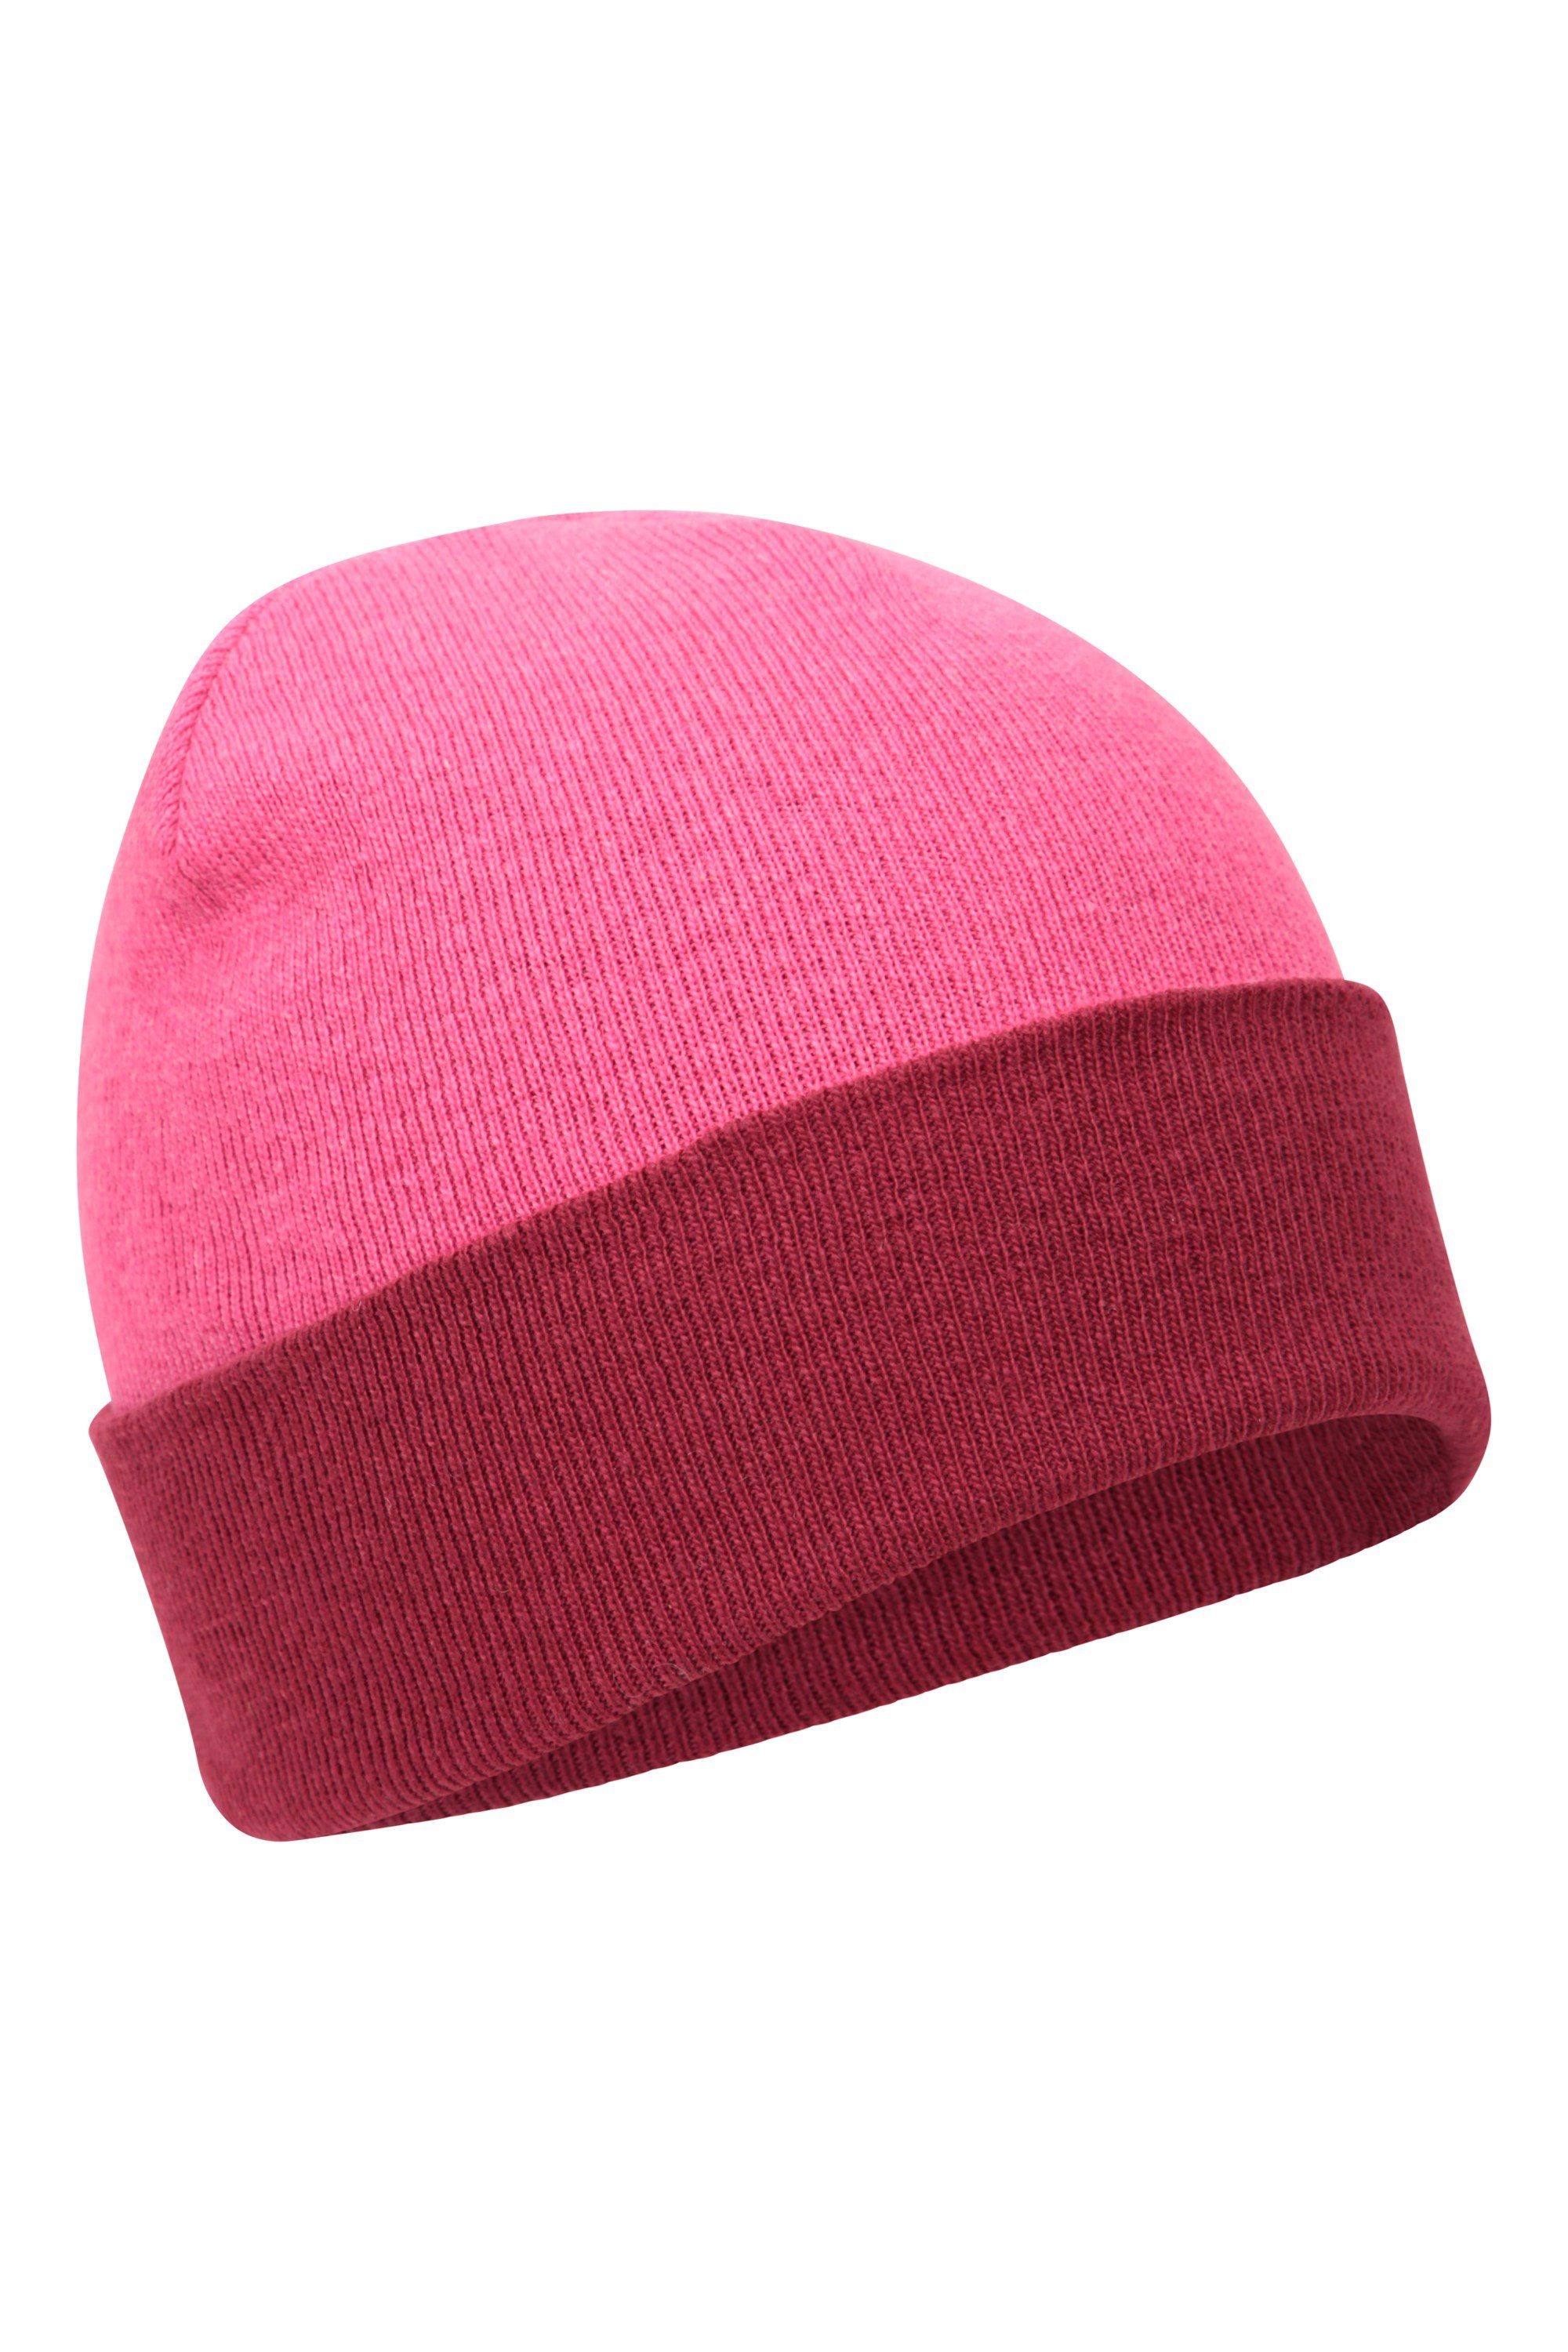 Augusta Kids Recycled Reversible Beanie - Pink